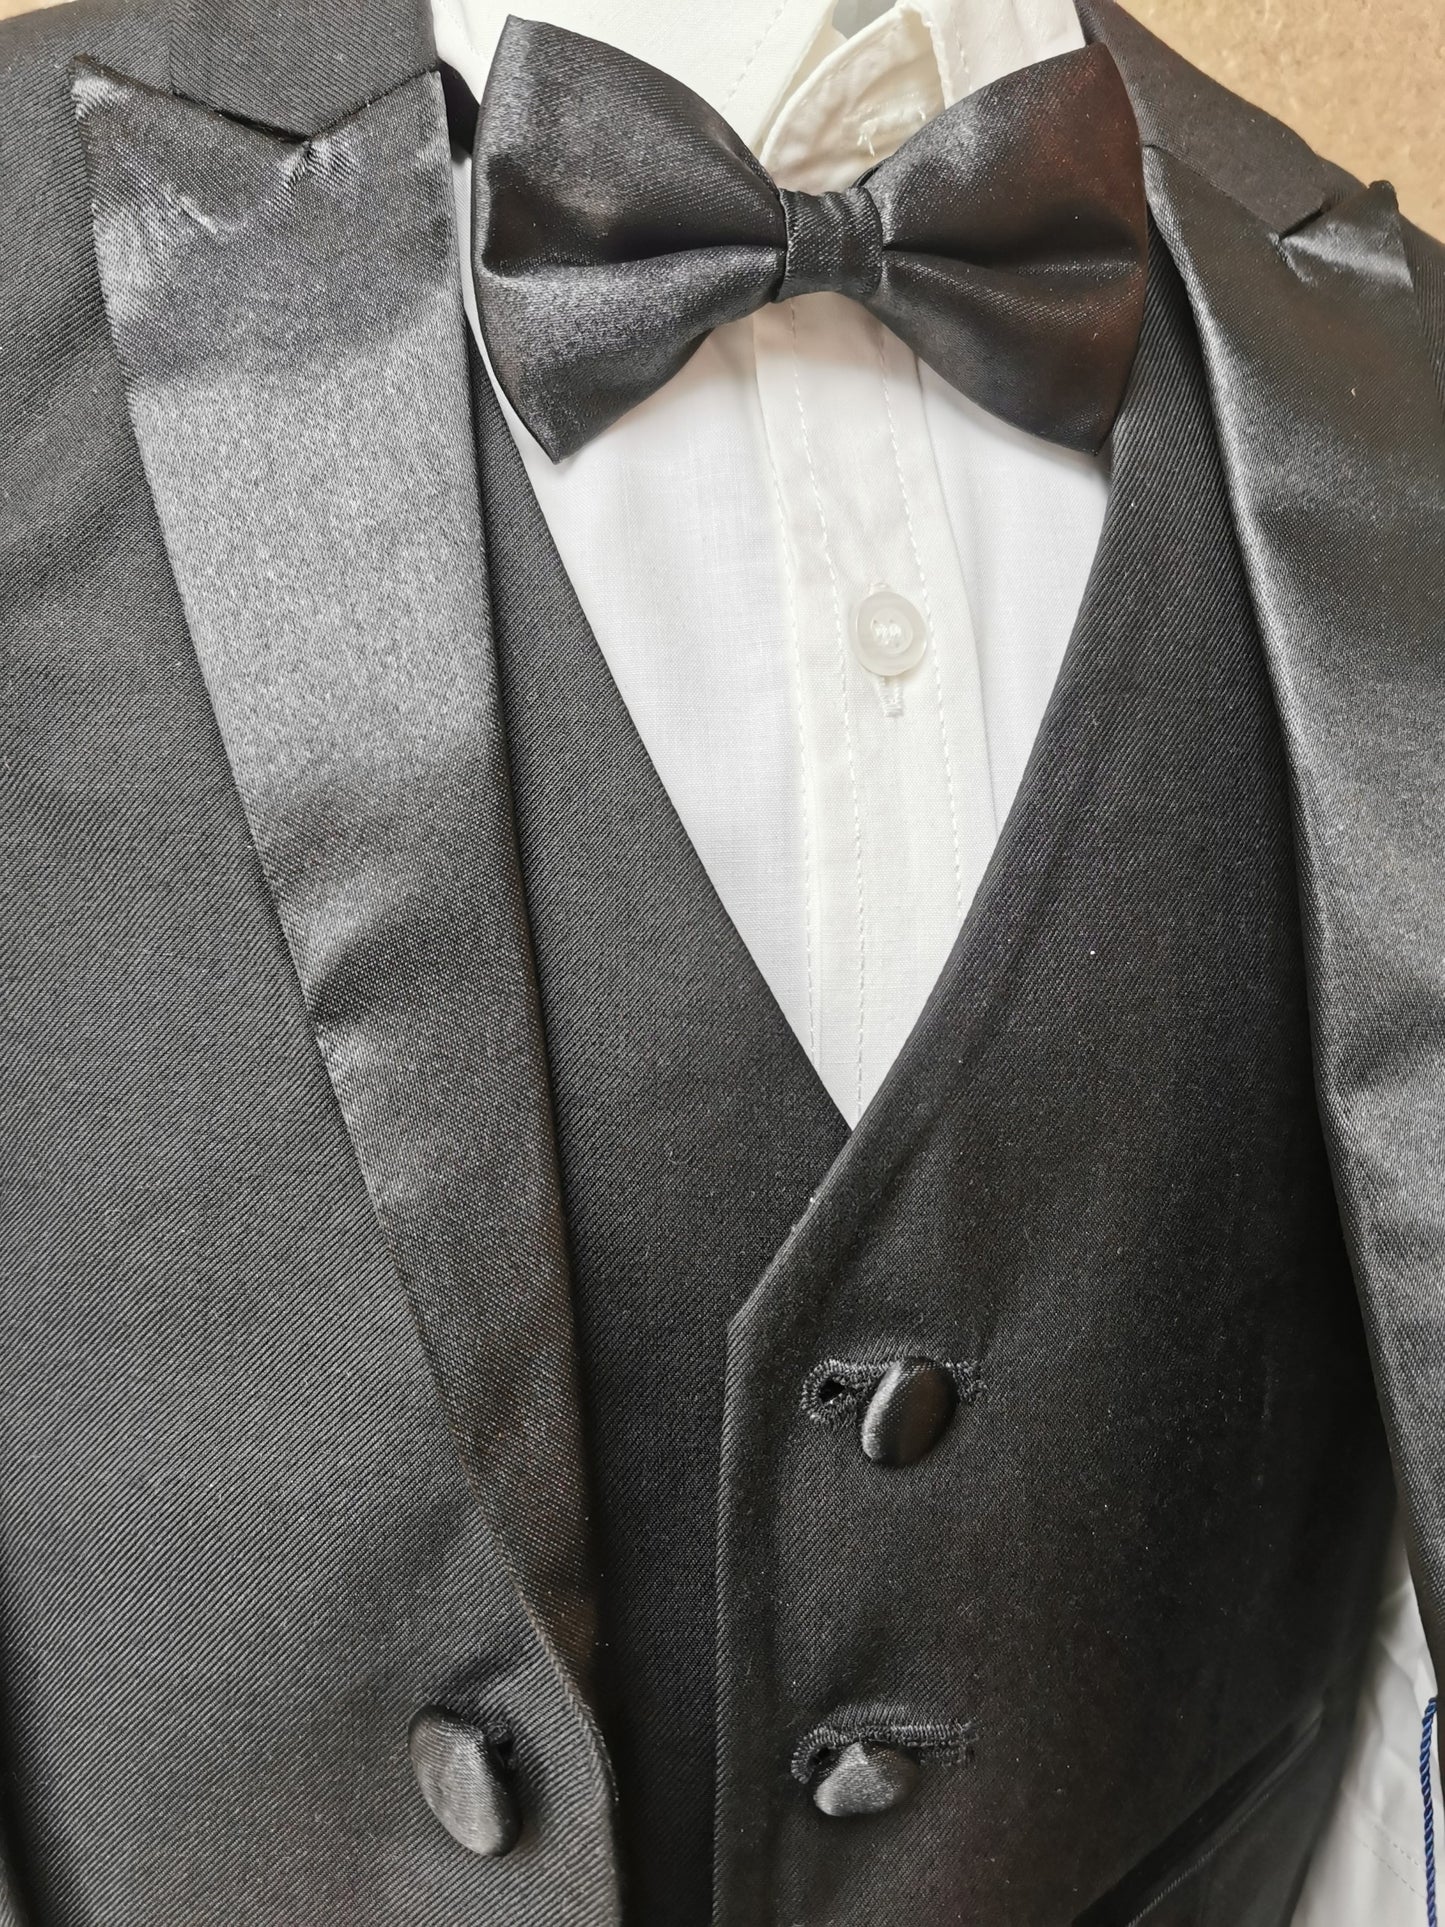 Boys Traditional Black Tuxedo Suit with Bow Tie